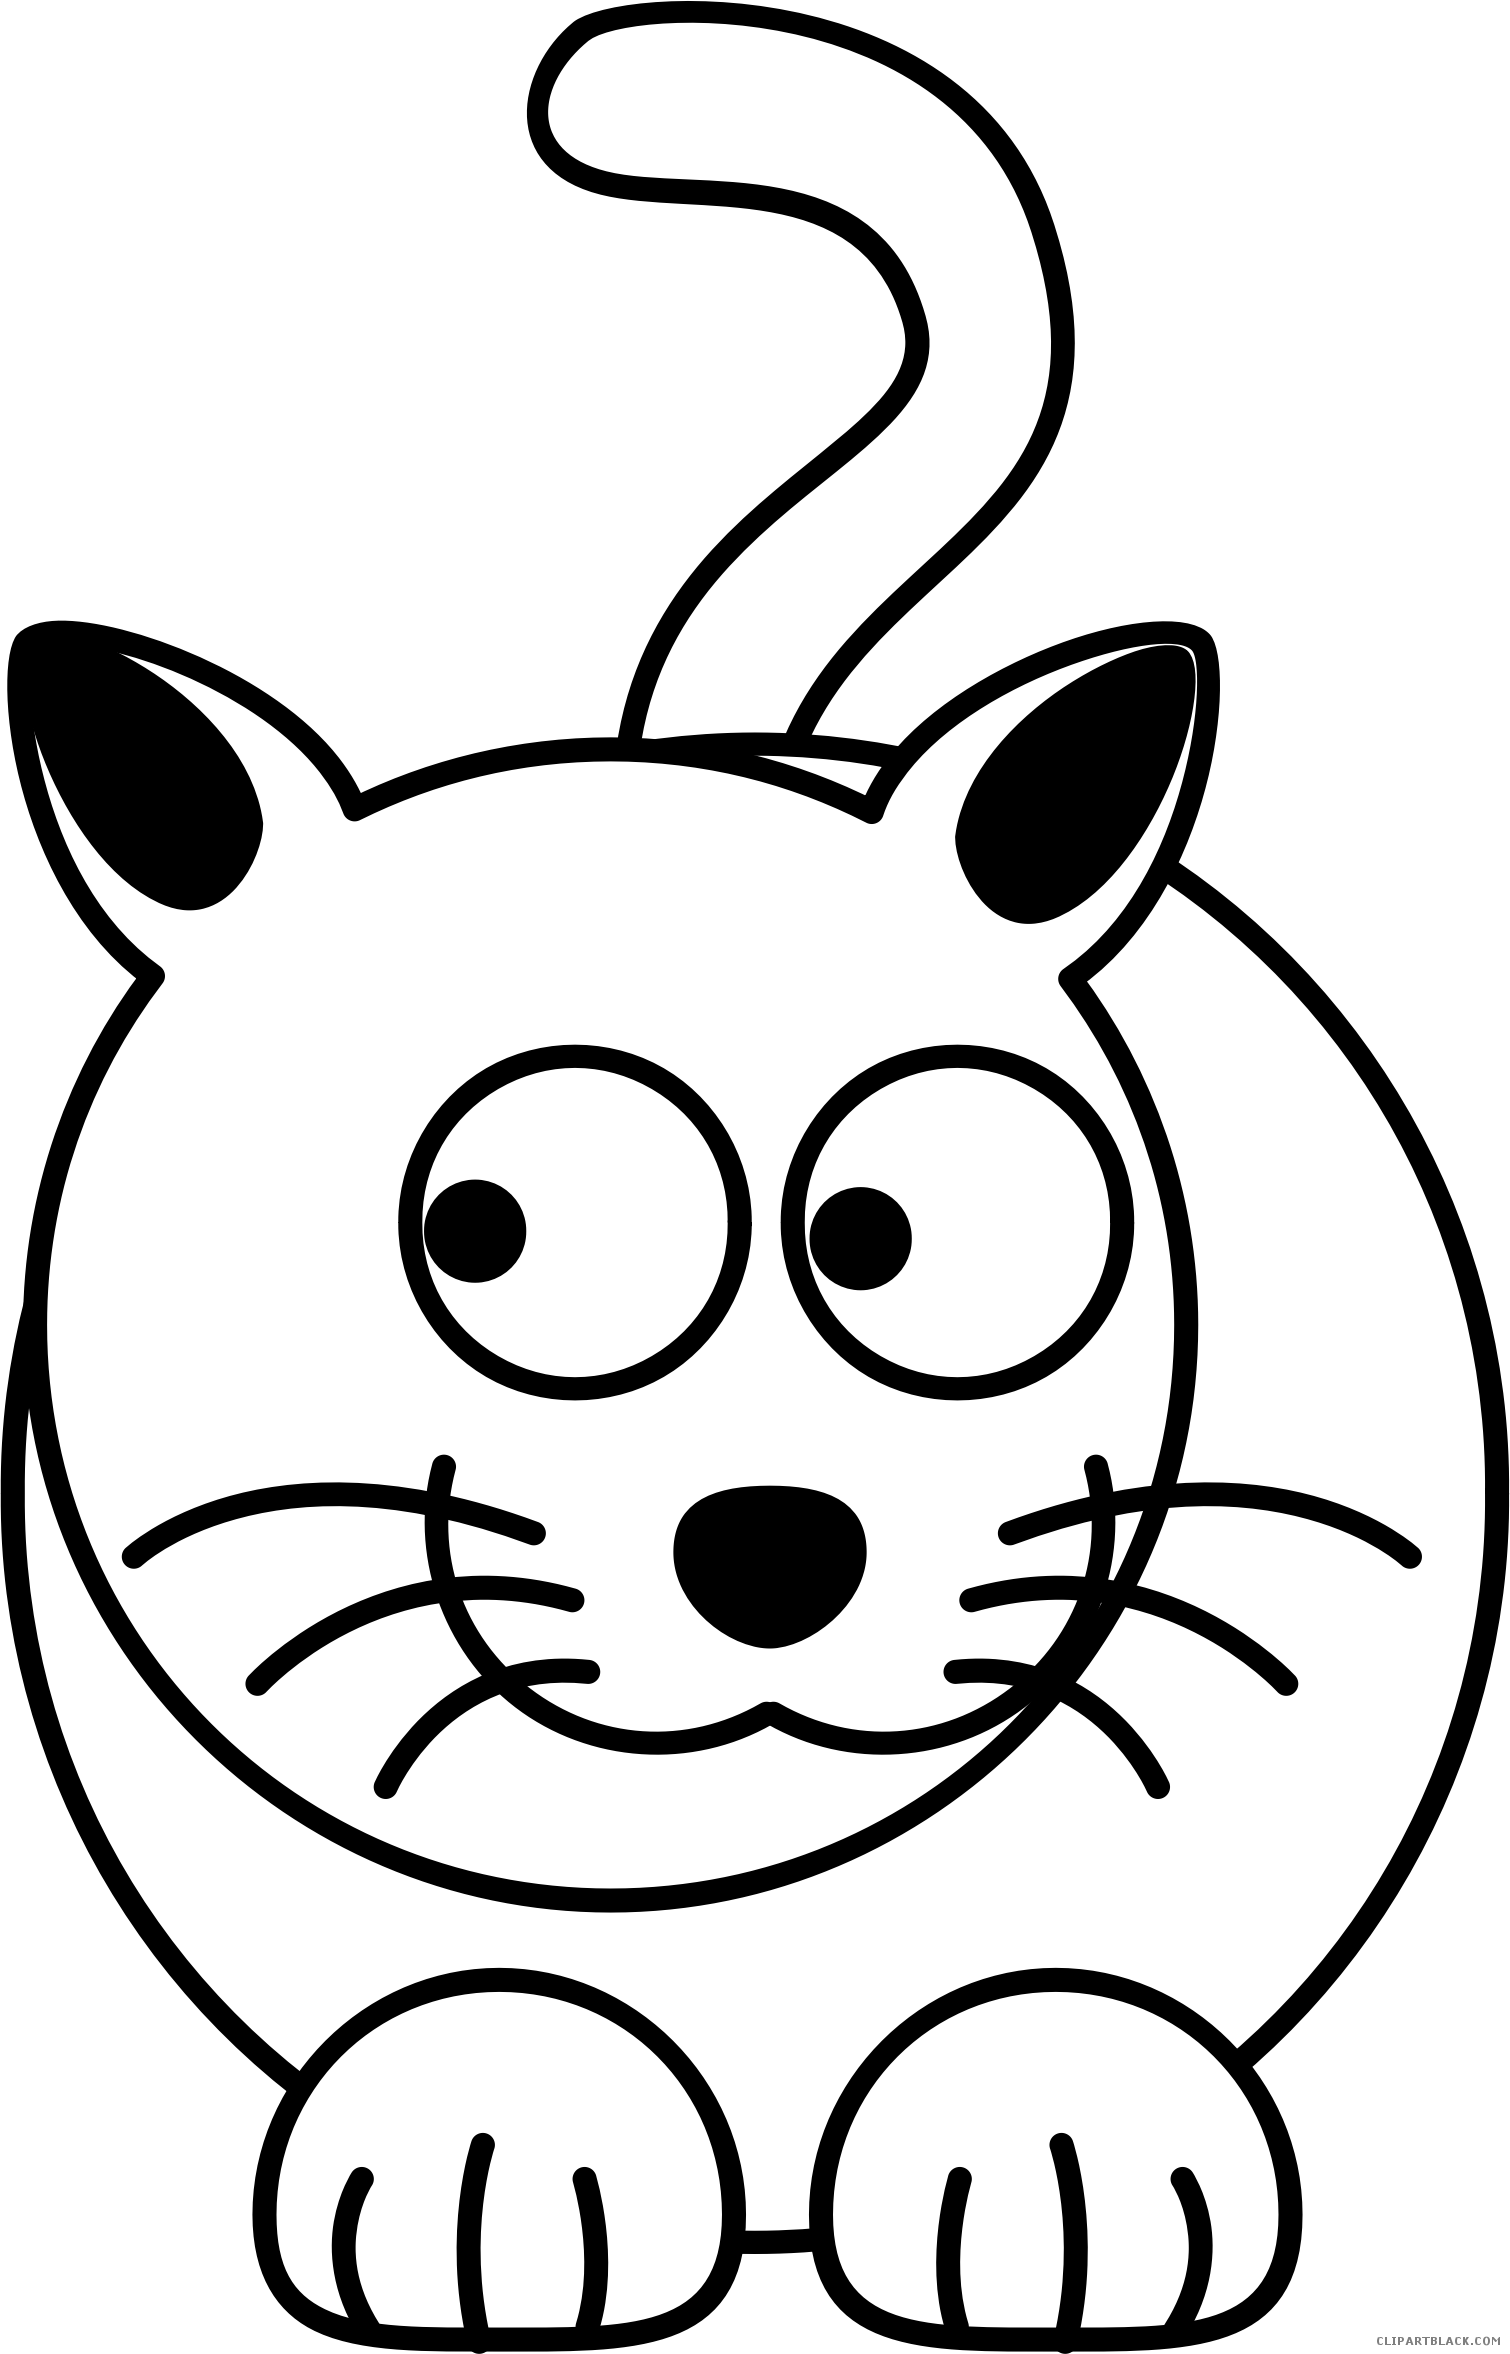 Kitty Cat Animal Free Black White Clipart Images Clipartblack - Cartoon Cat (1510x2354)